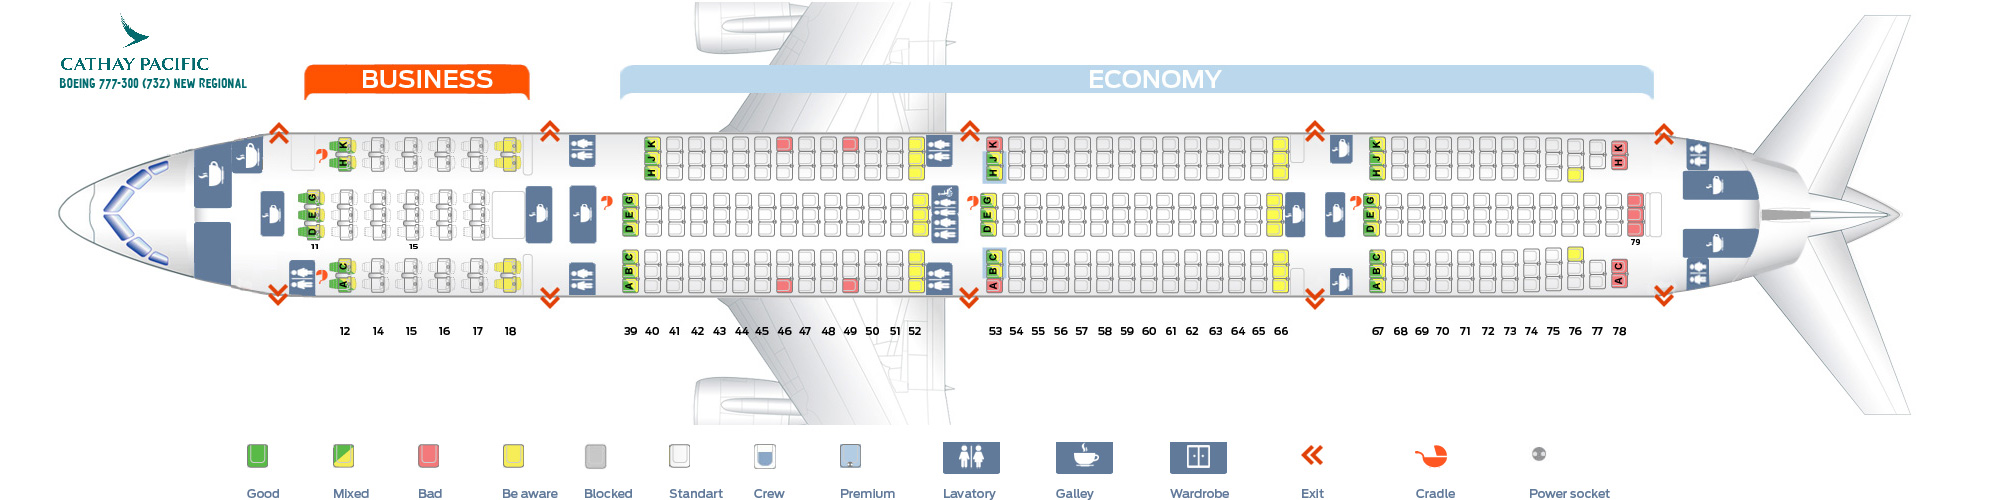 Thy Boeing 777 Seating Chart